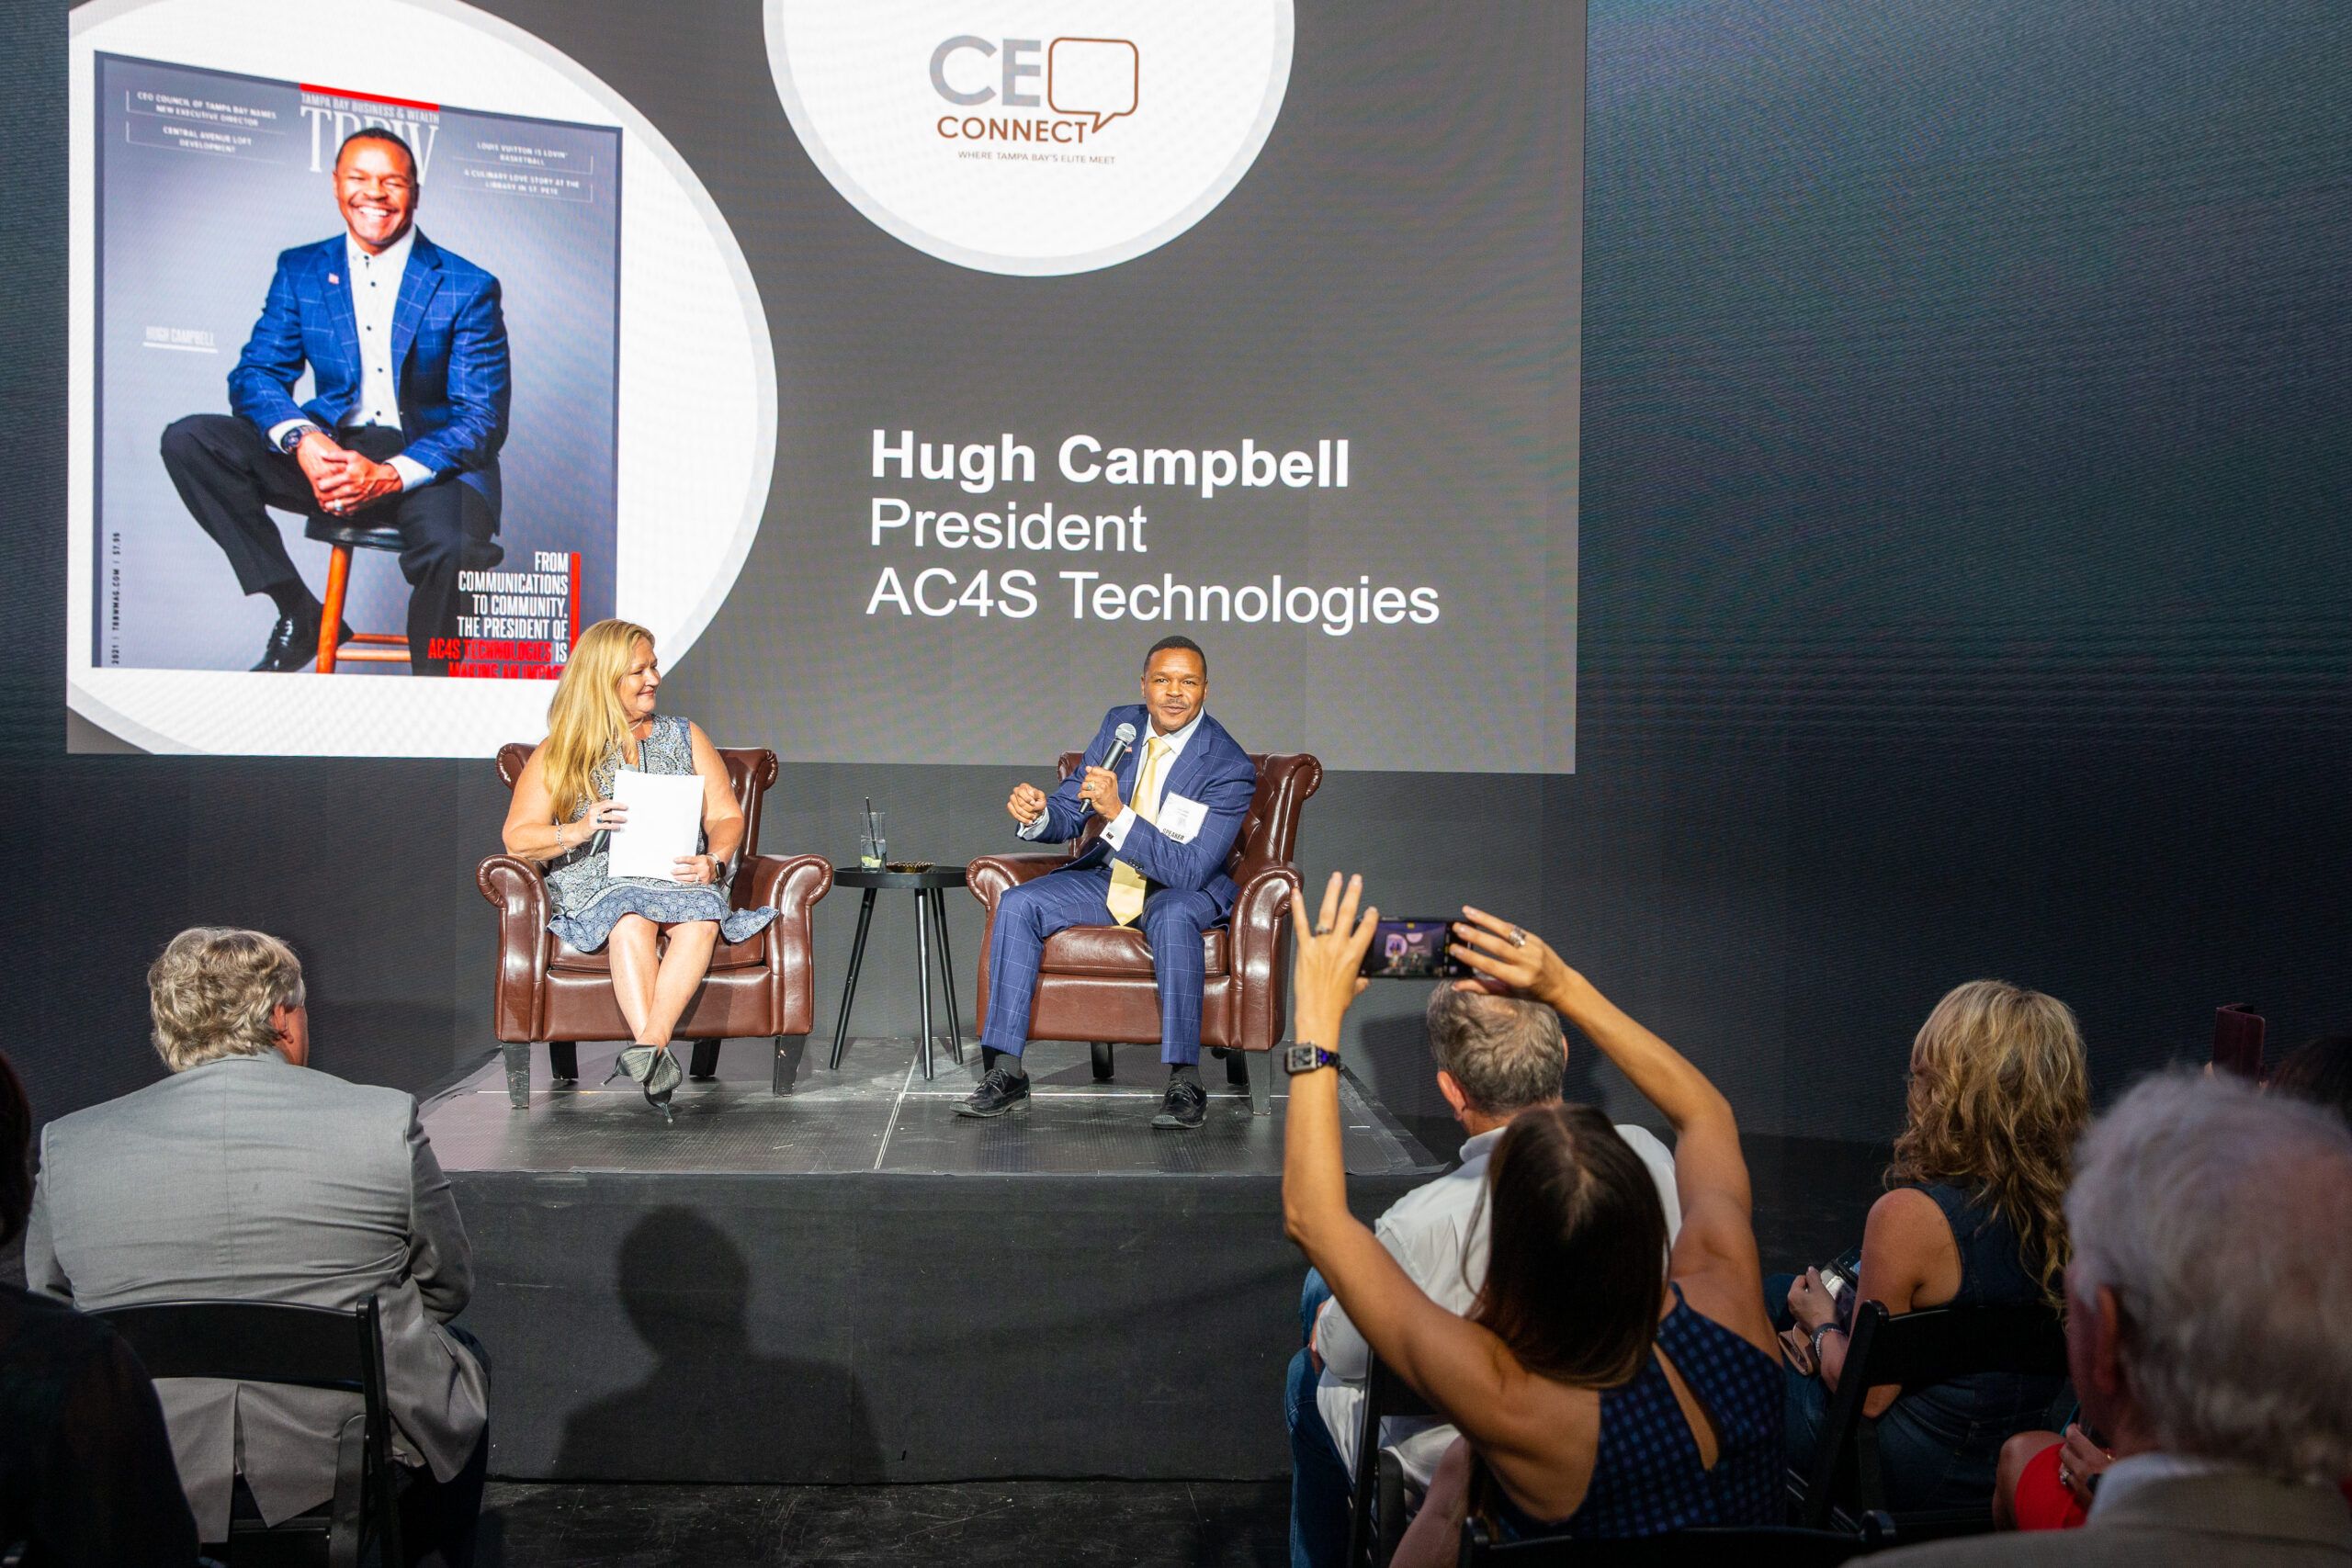 CEO Connect with Hugh Campbell (PHOTOS) - Tampa Bay Business & Wealth